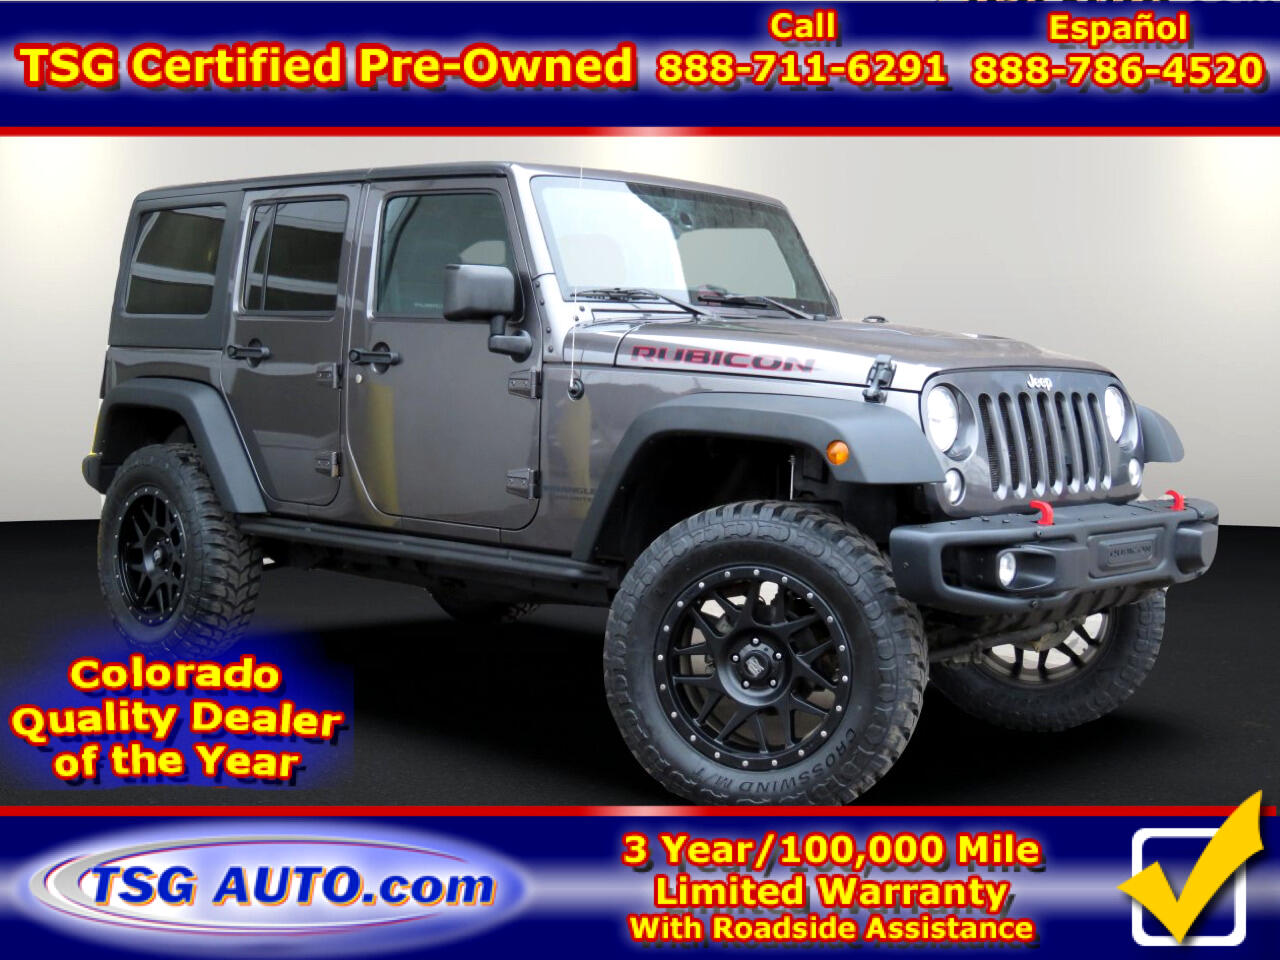 Used 2016 Jeep Wrangler Unlimited 4wd Rubicon W Custom Lift